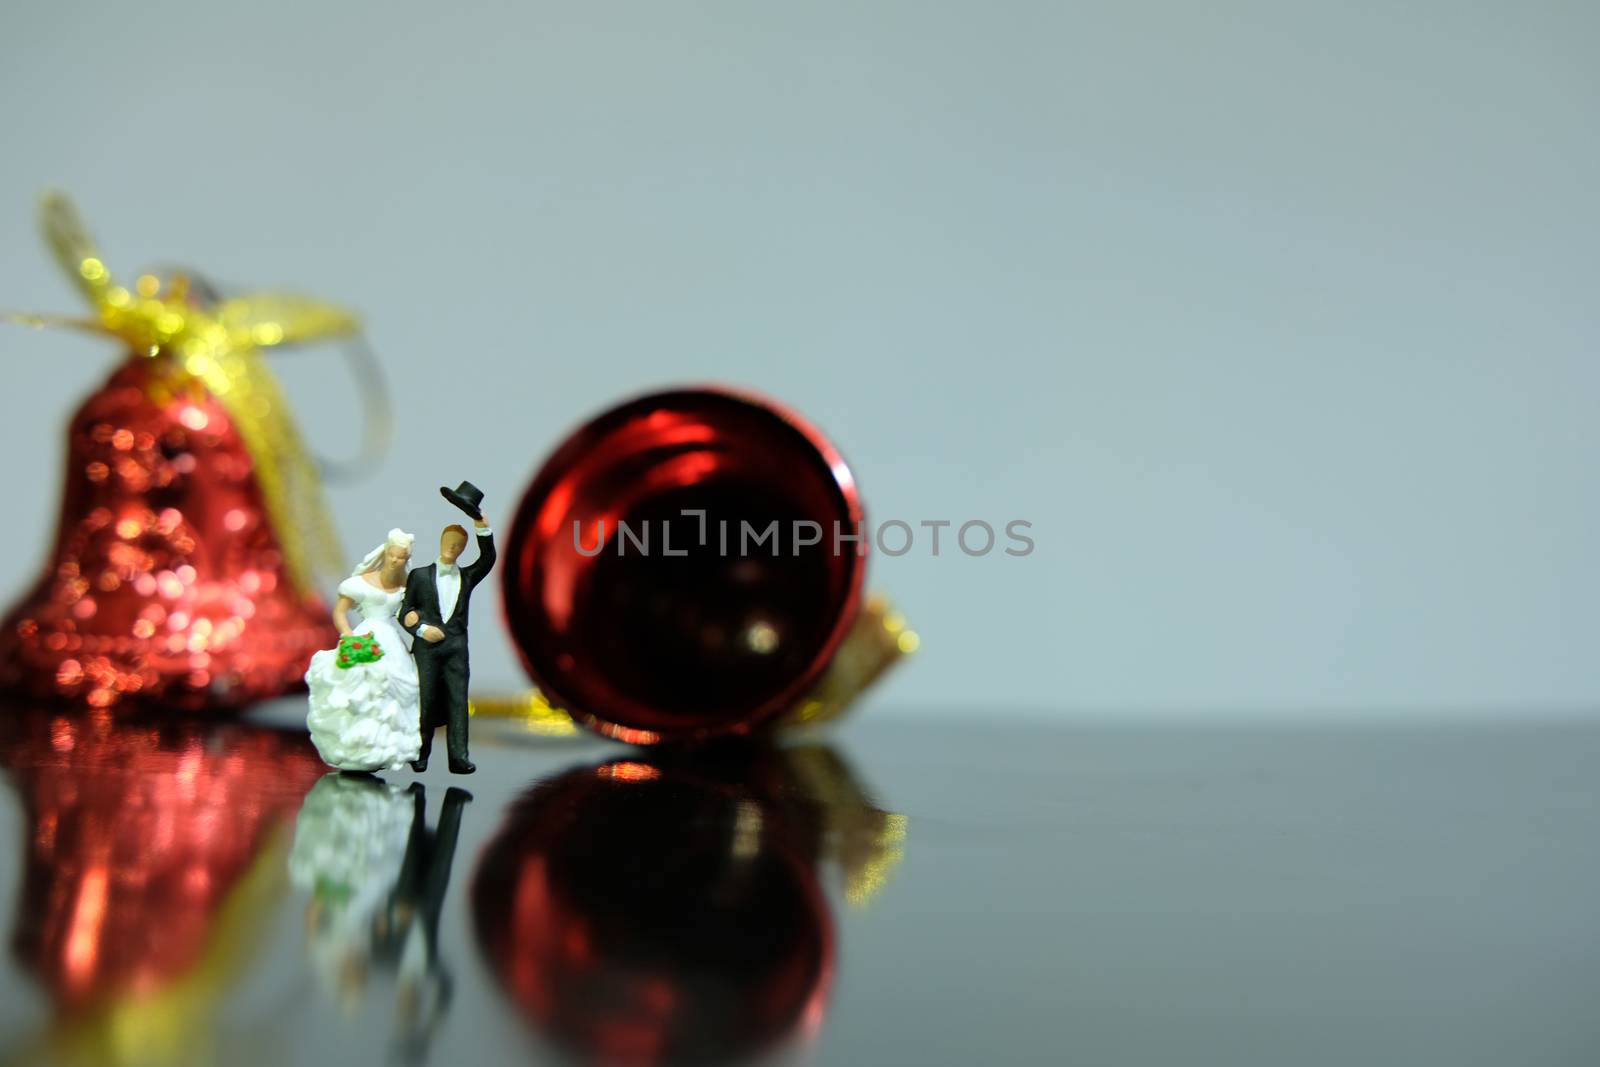 Miniature wedding concept. Bride and groom walking out make greeting after wedding procession. image photo by Macrostud